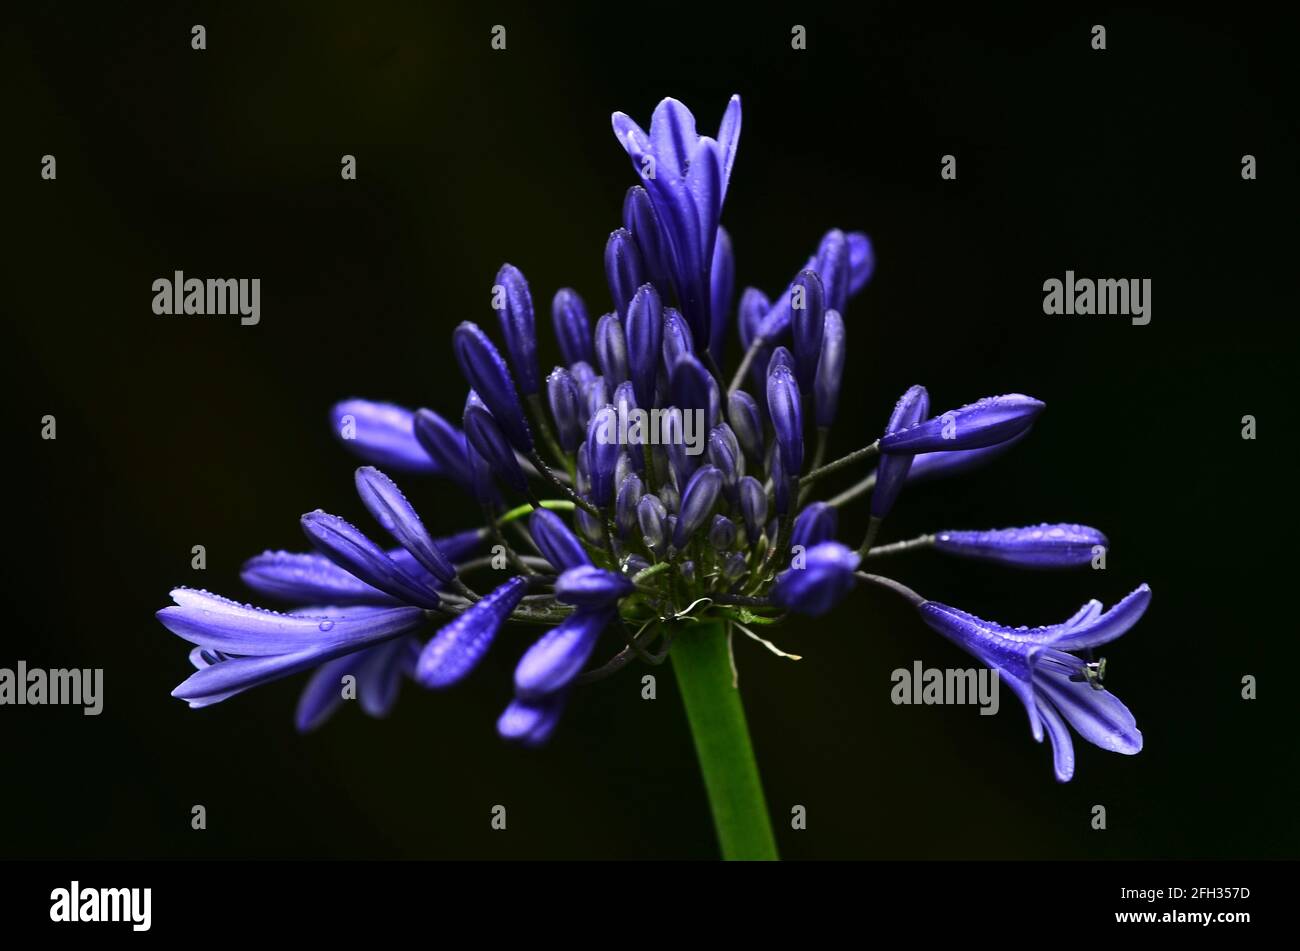 Agapanthus 'Torbay' or African lily in flower. Dorset, UK July 2017 Stock Photo